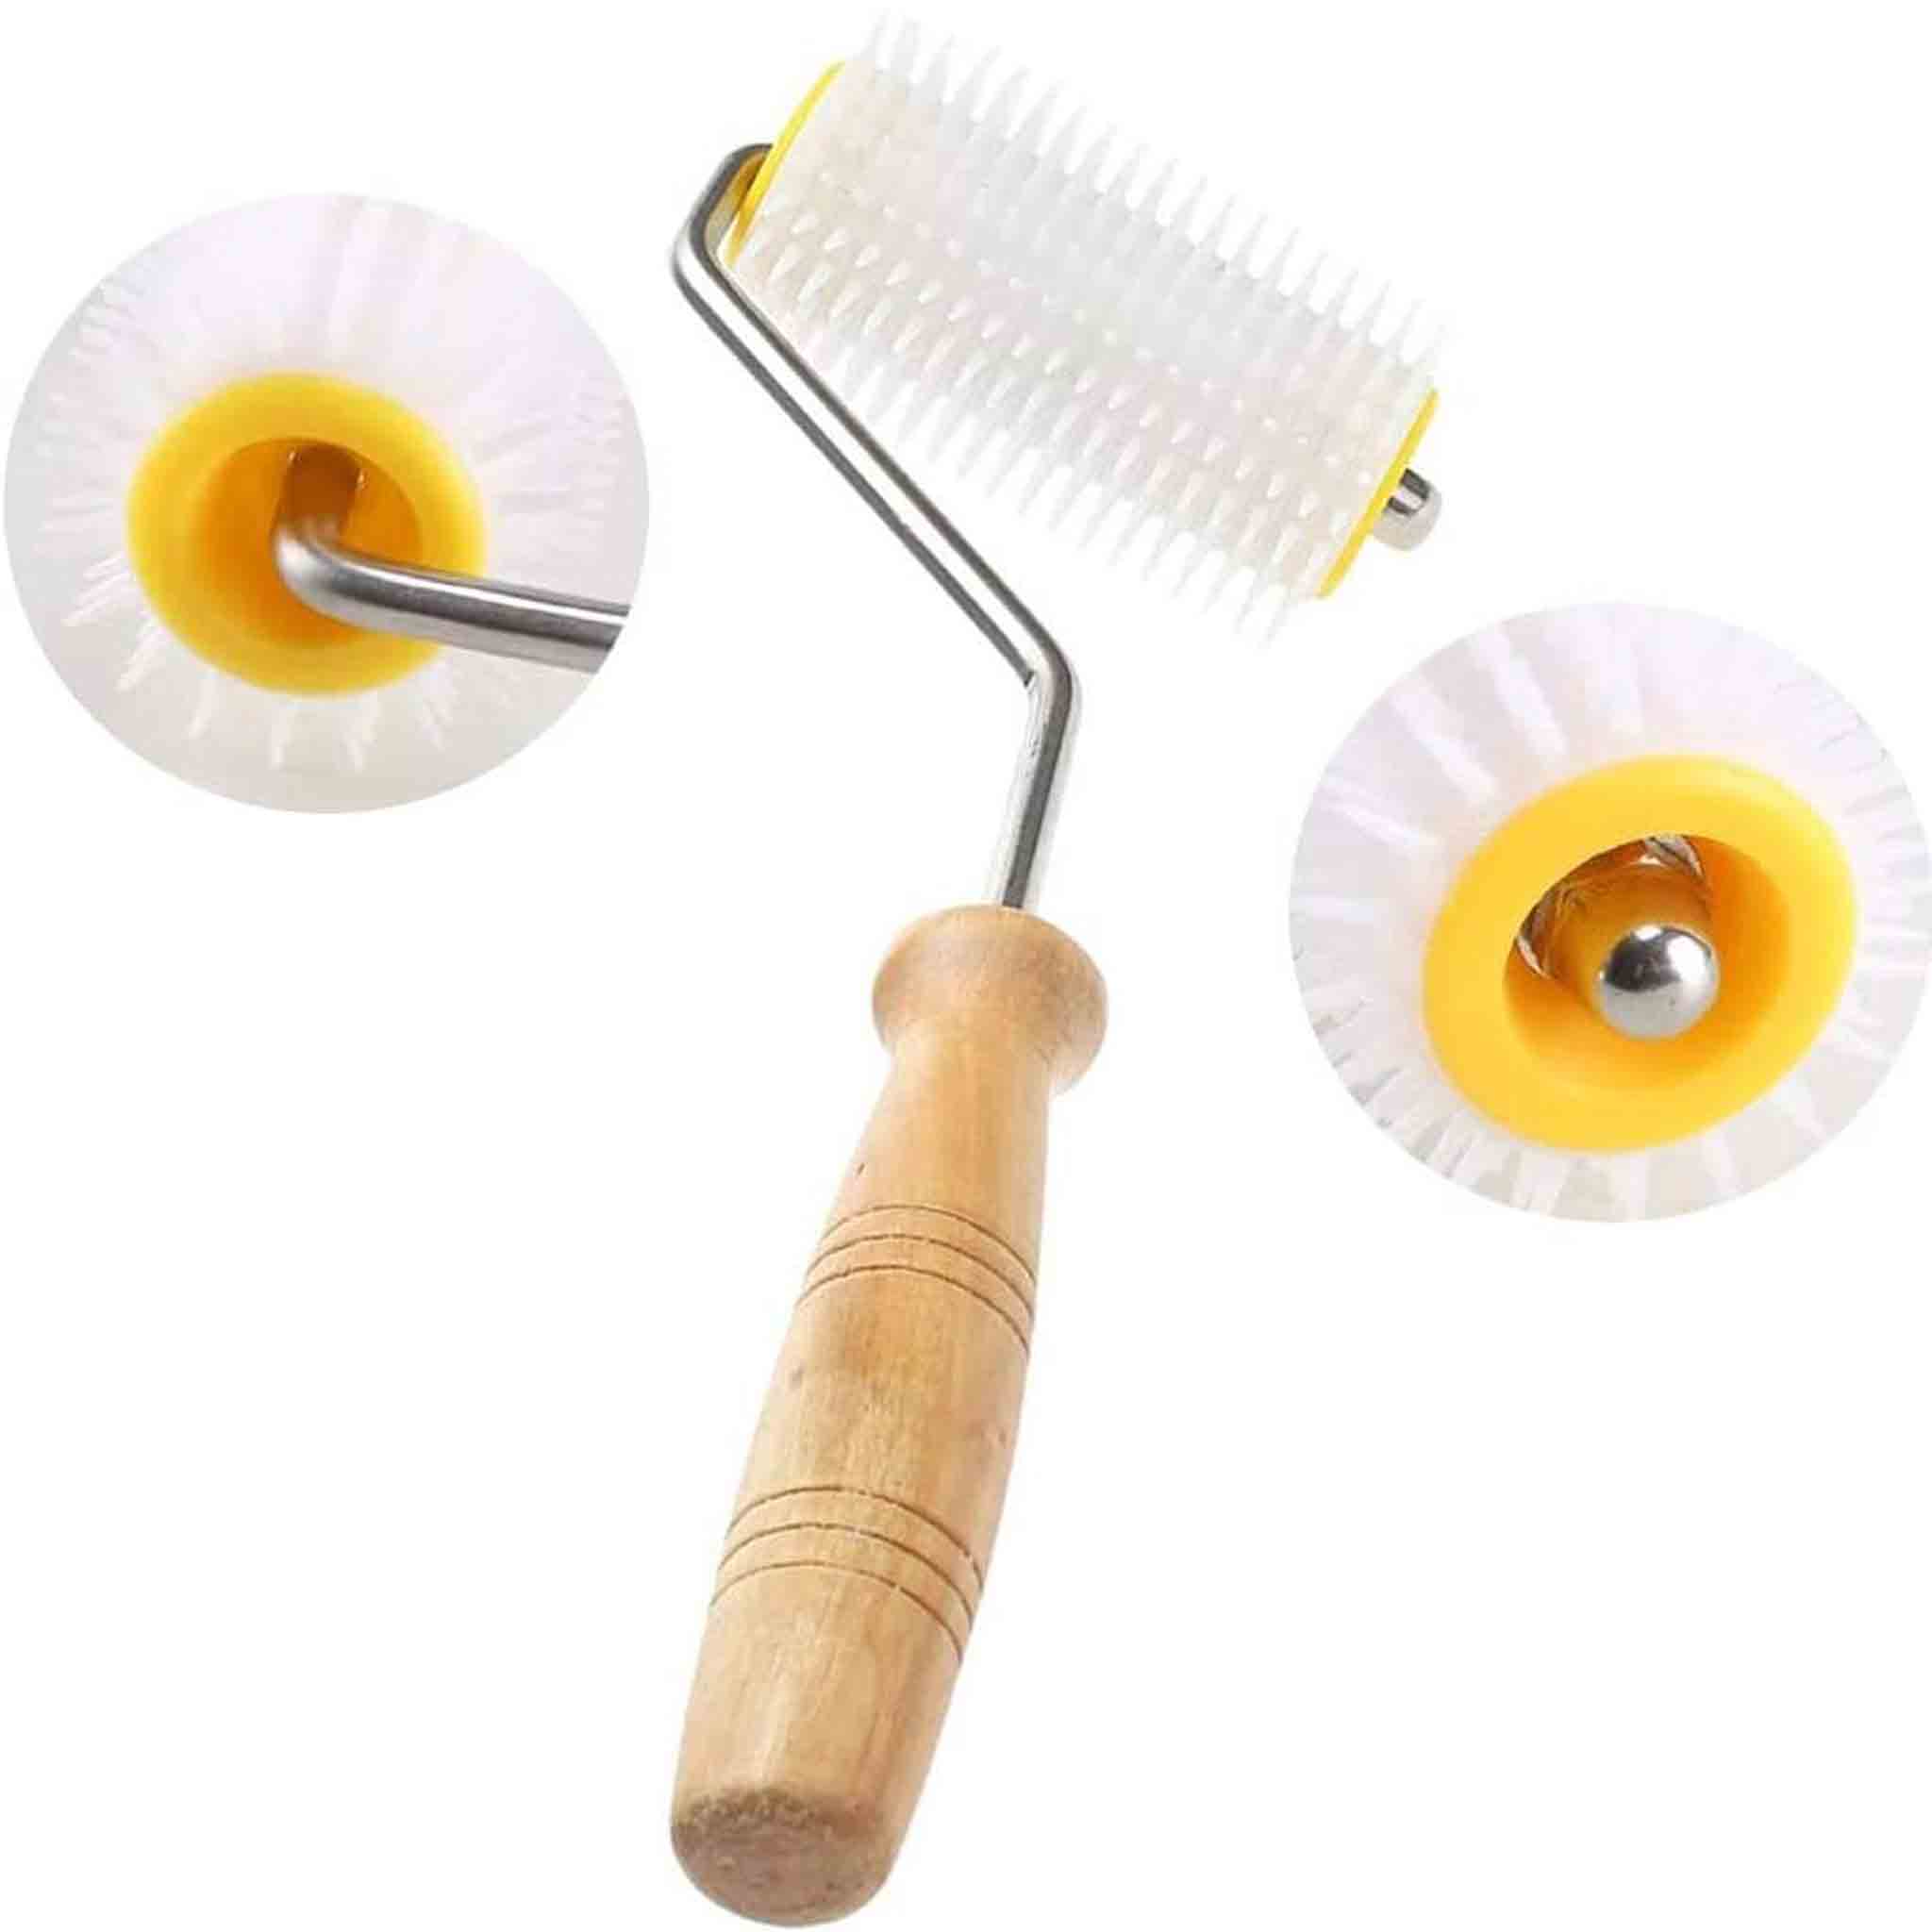 Beekeeping Honey Rotating Uncapping Scraper with Wooden Handle - Tools collection by Buzzbee Beekeeping Supplies